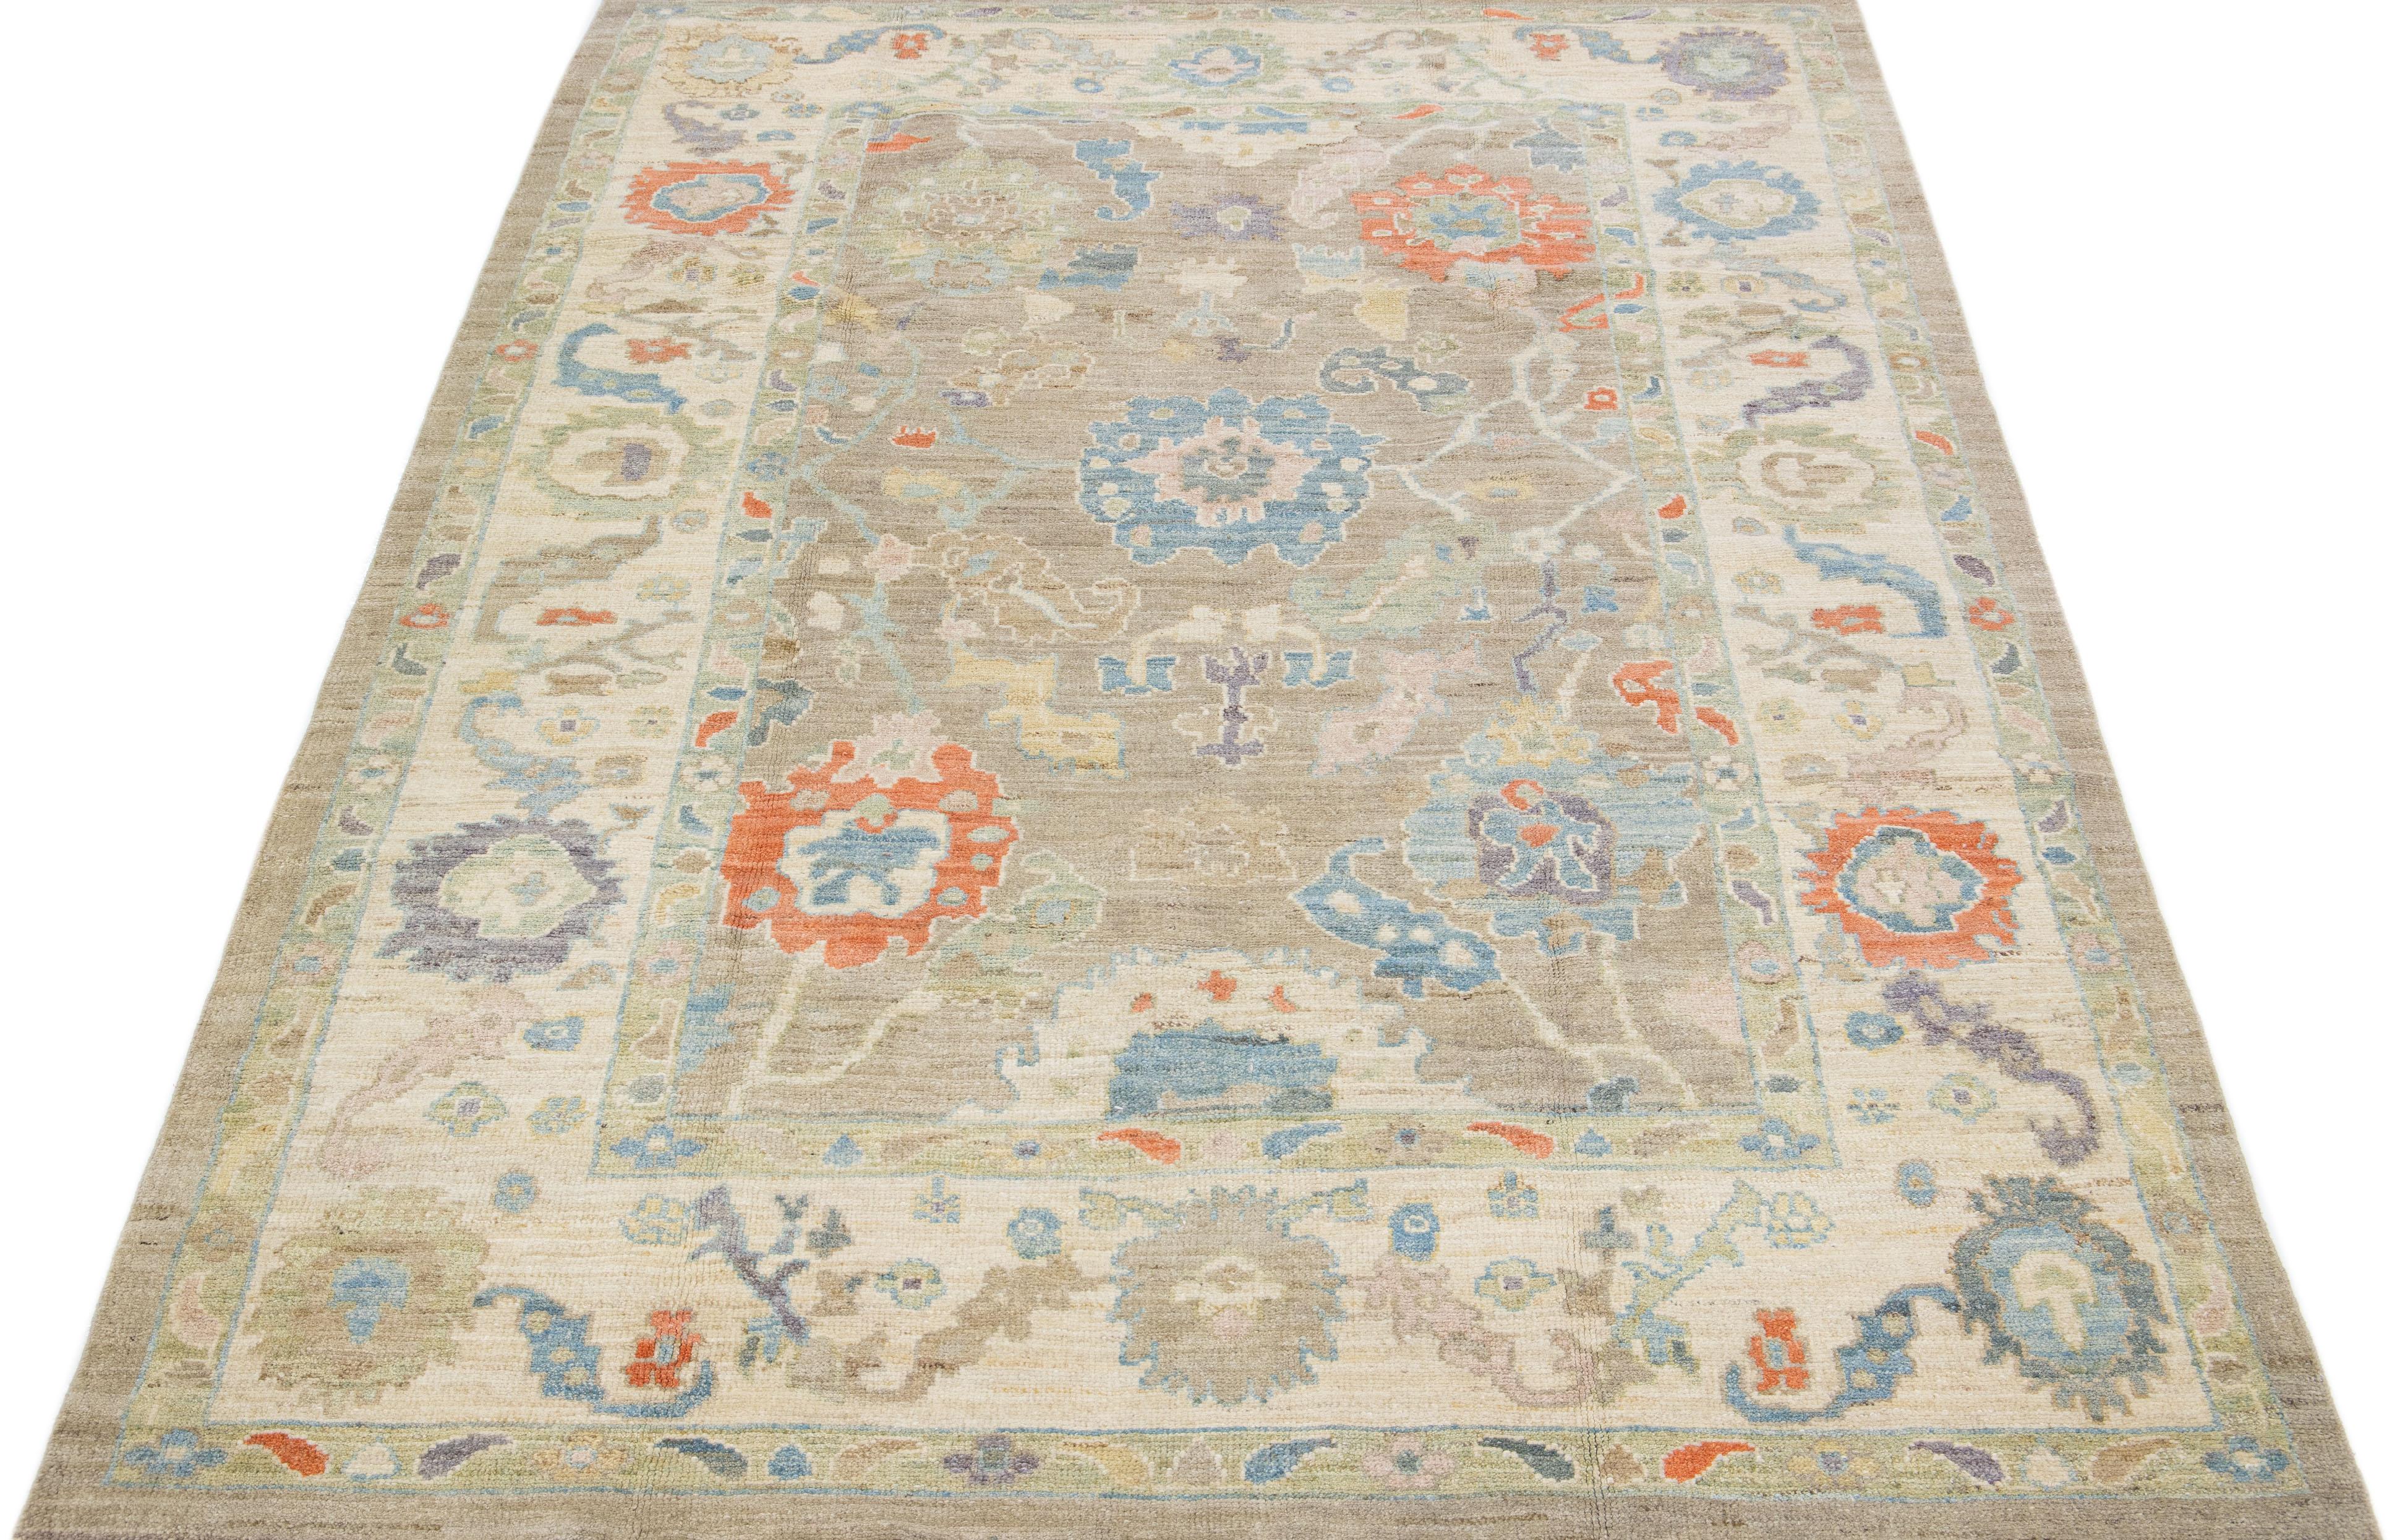 Beautiful modern Sultanabad hand-knotted wool rug with a tan color field. This rug has a designed frame with green, blue, and orange accents in a gorgeous all-over floral motif.

This rug measures: 6'5